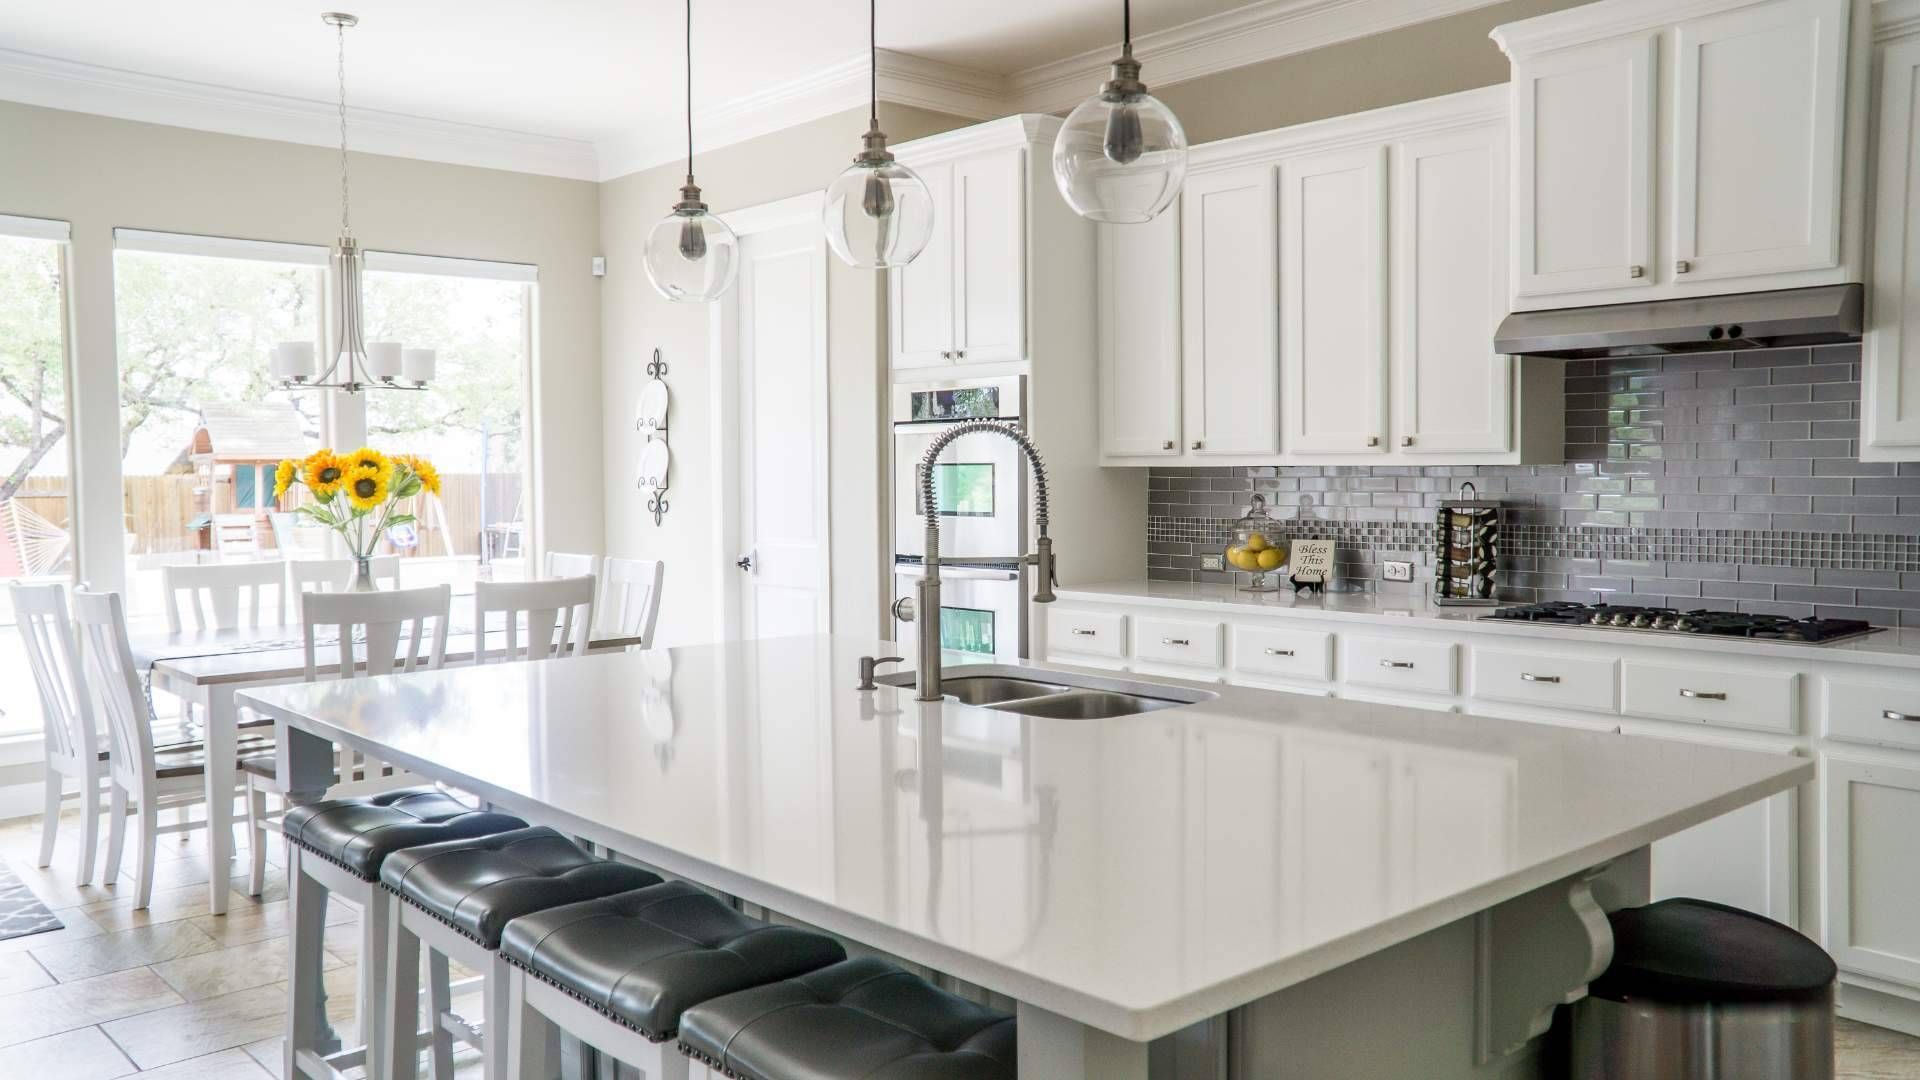 Kitchen tweaks to add value and appeal